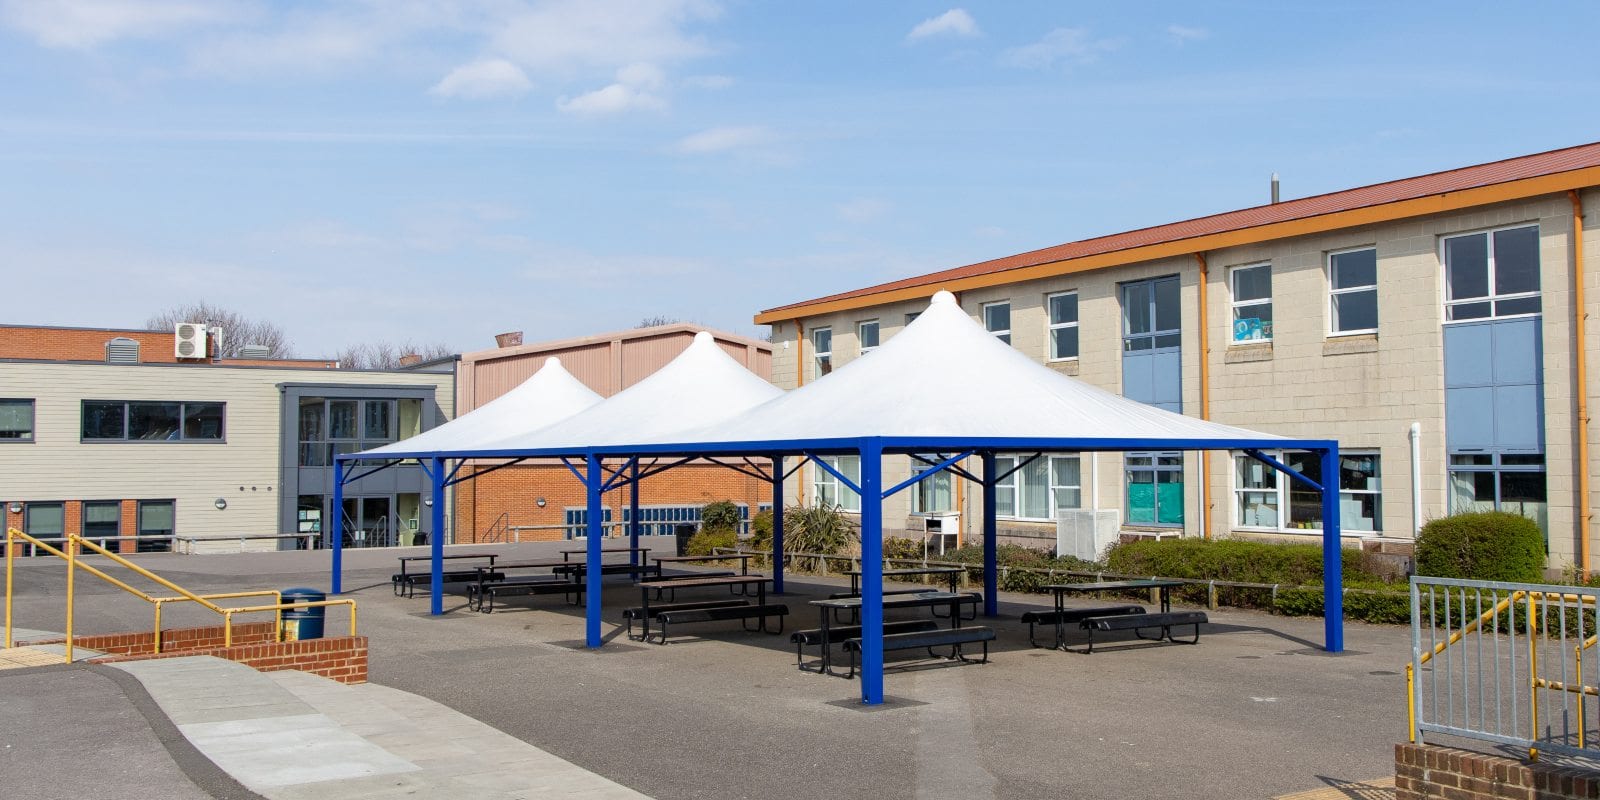 Fabric tepee structures we designed for The Harvey Grammar School